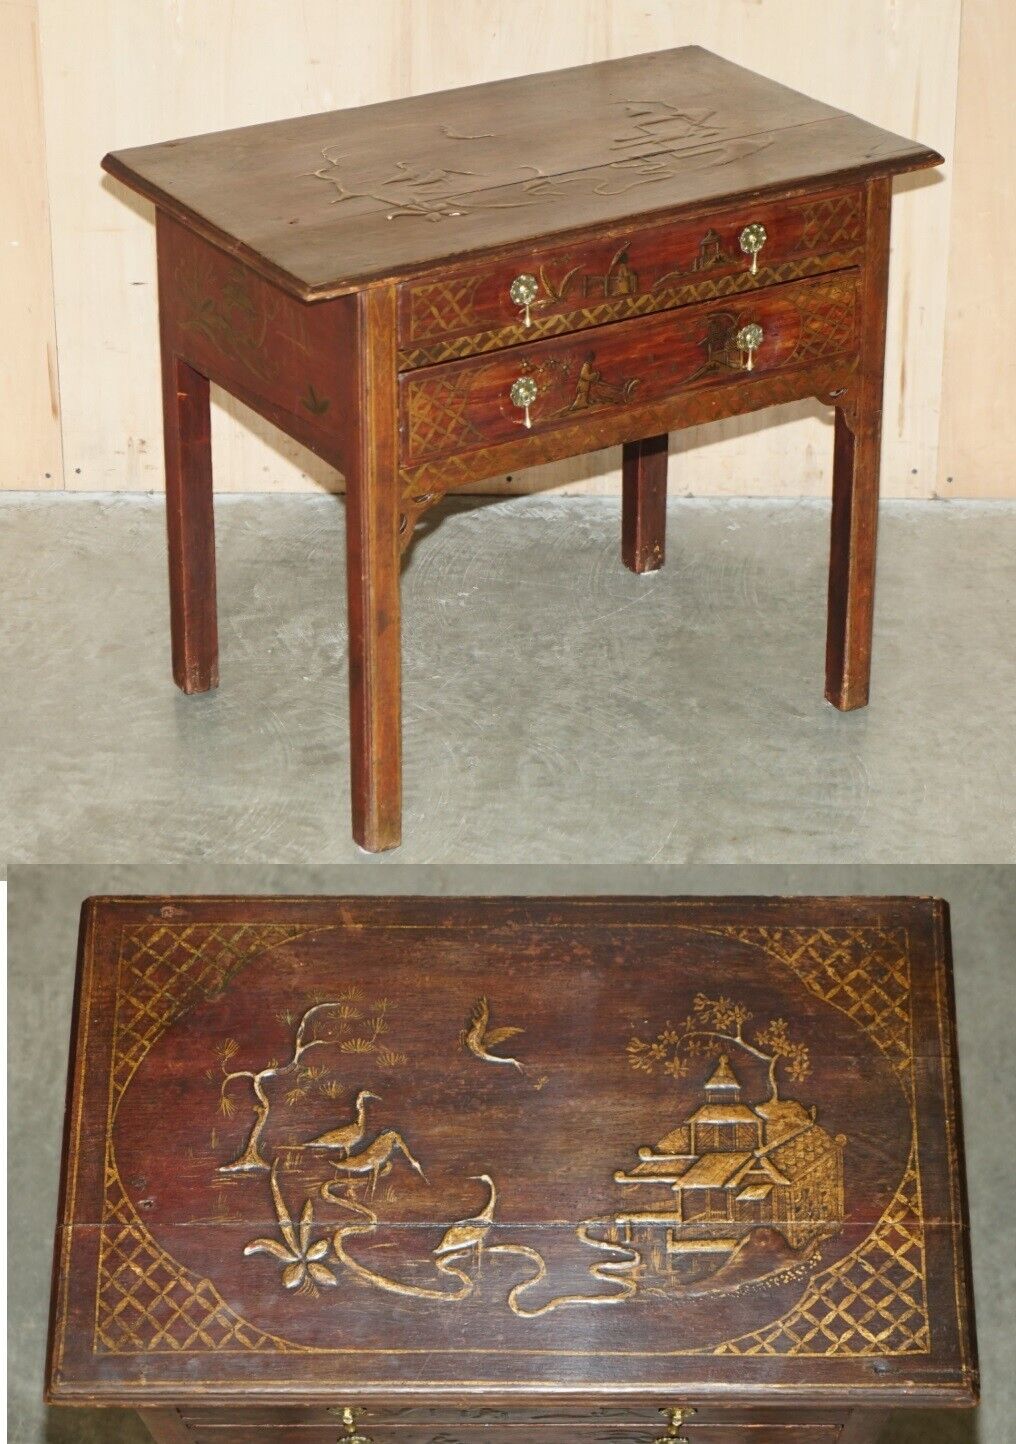 ANTIQUE ORIGINAL GEORGE III RED LACQUER & GILT JAPANNED SIDE TABLE CIRCA 1760